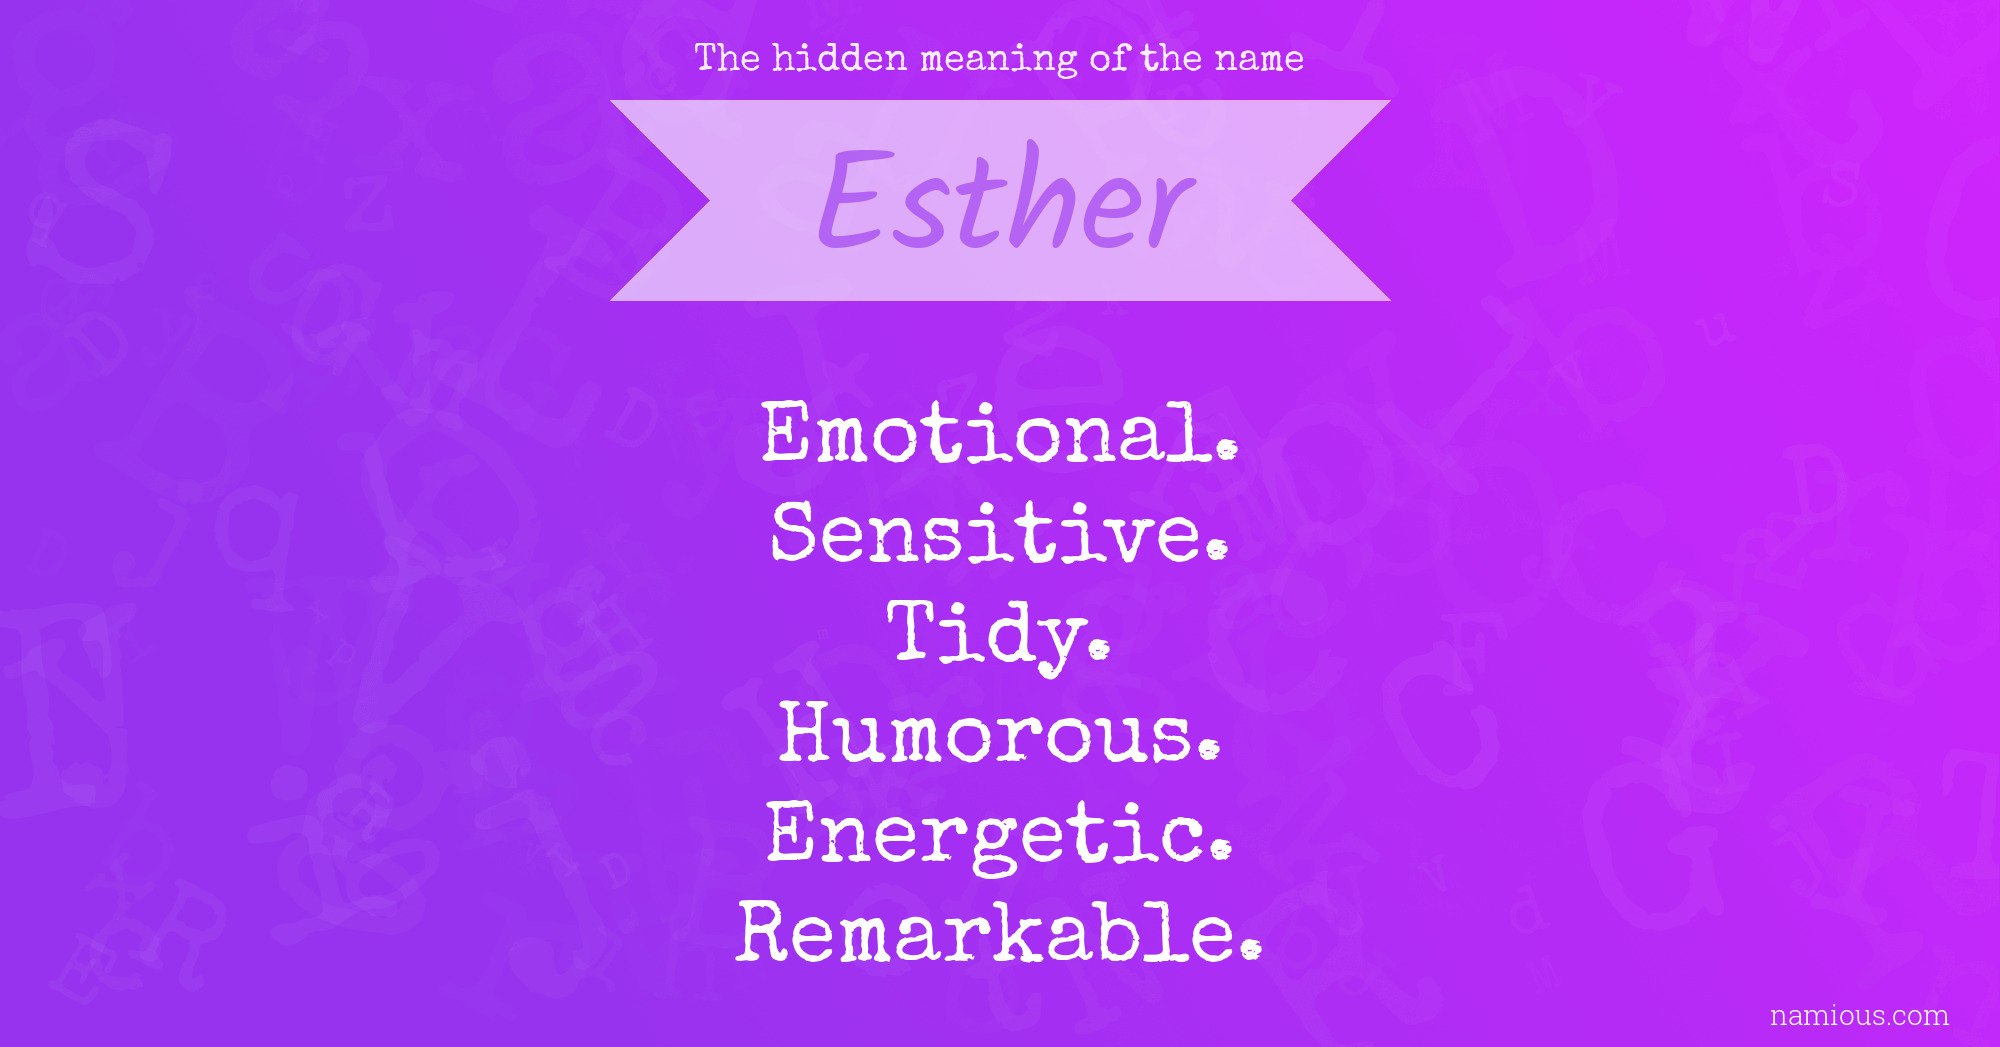 The hidden meaning of the name Esther